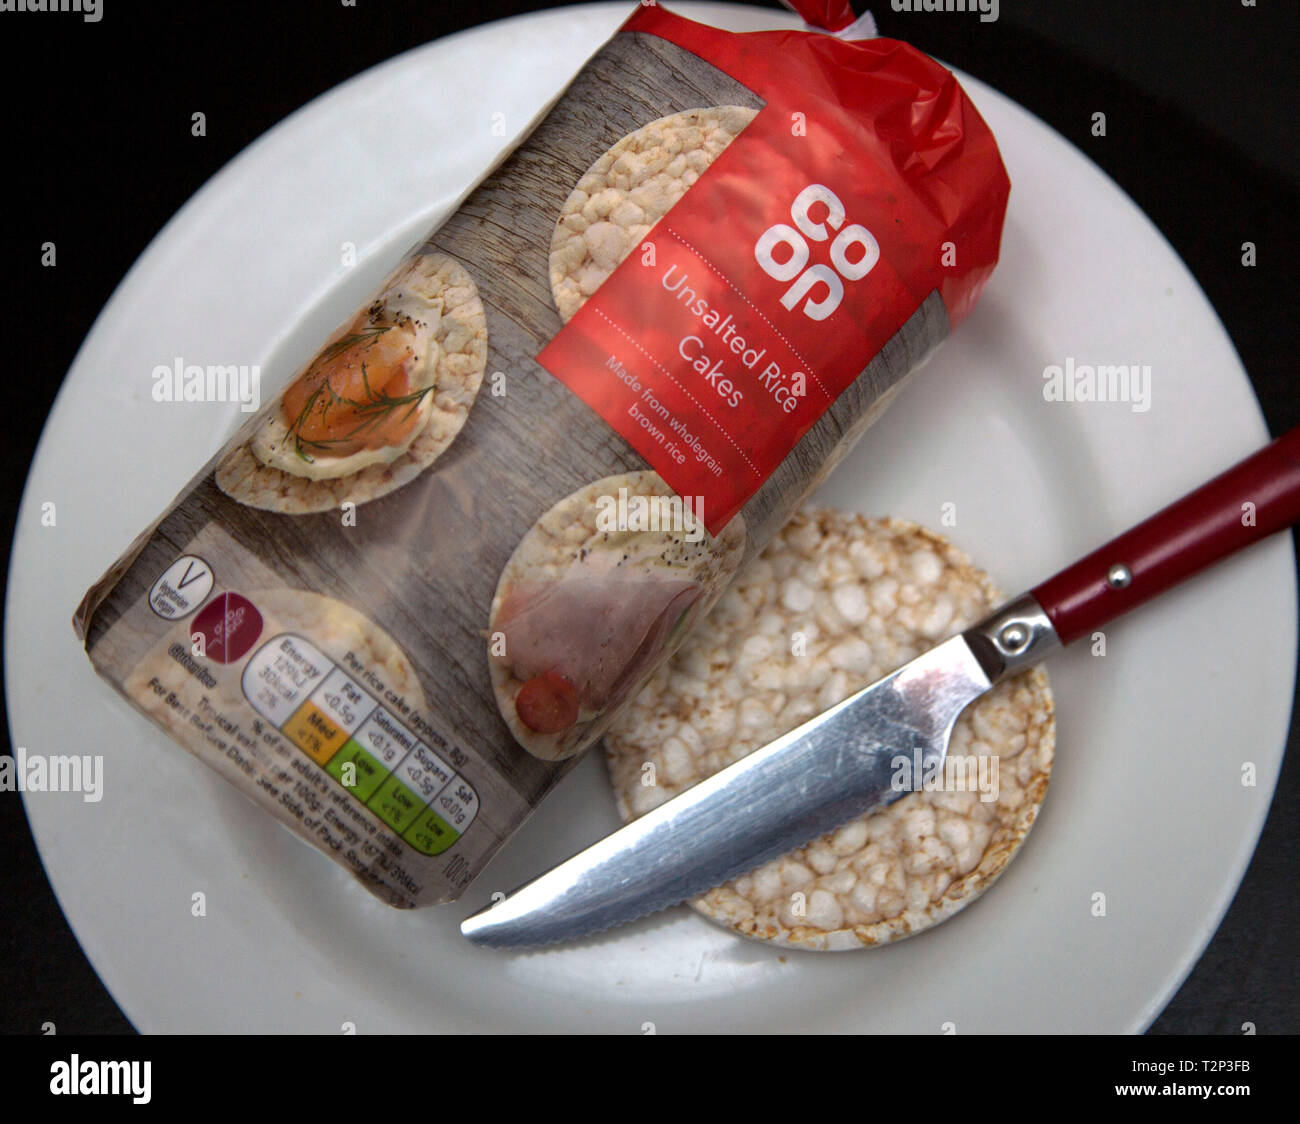 Co-Operative unsalted rice cakes, London Stock Photo